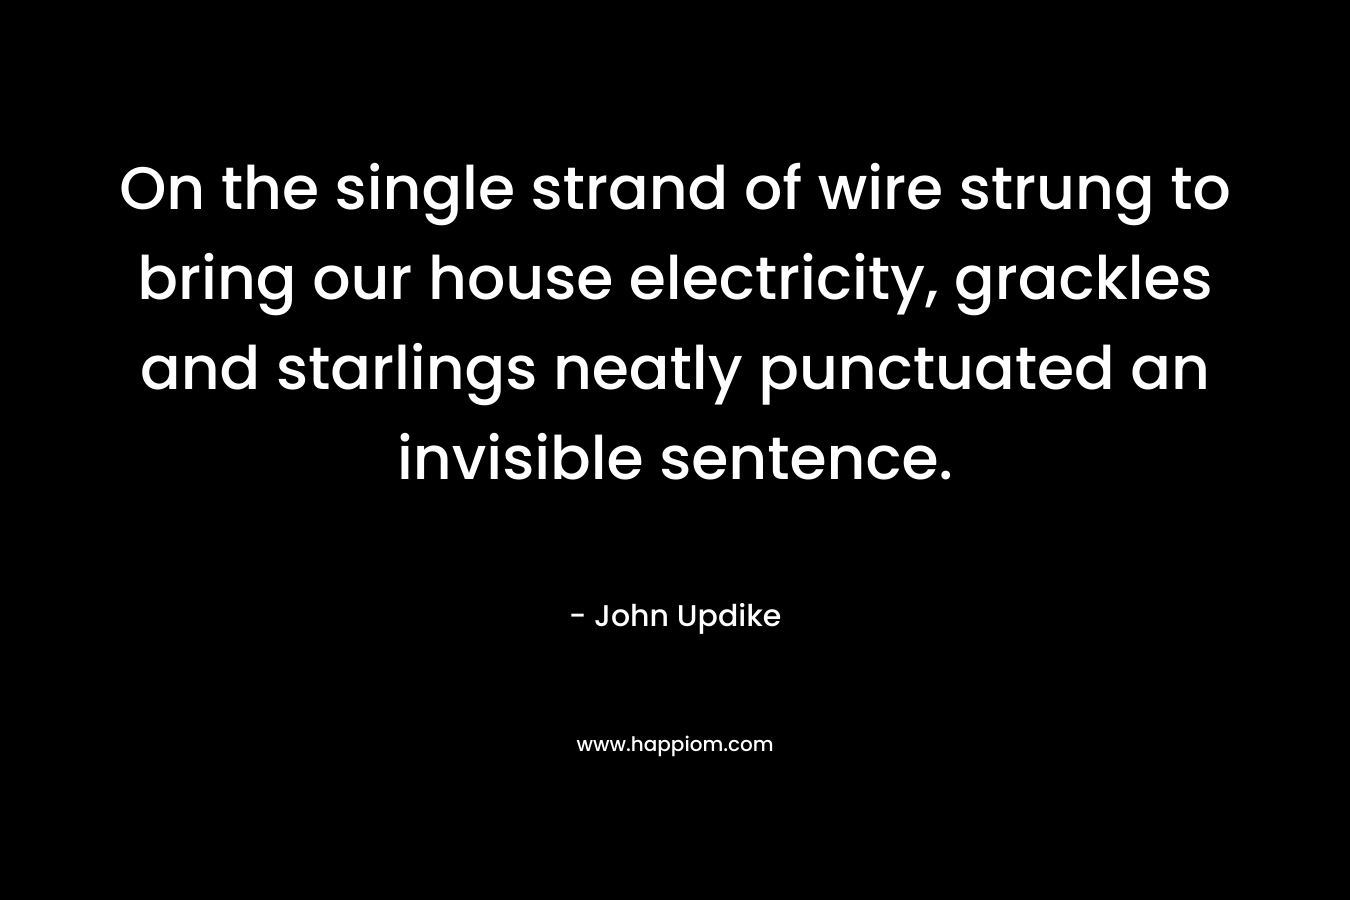 On the single strand of wire strung to bring our house electricity, grackles and starlings neatly punctuated an invisible sentence. – John Updike